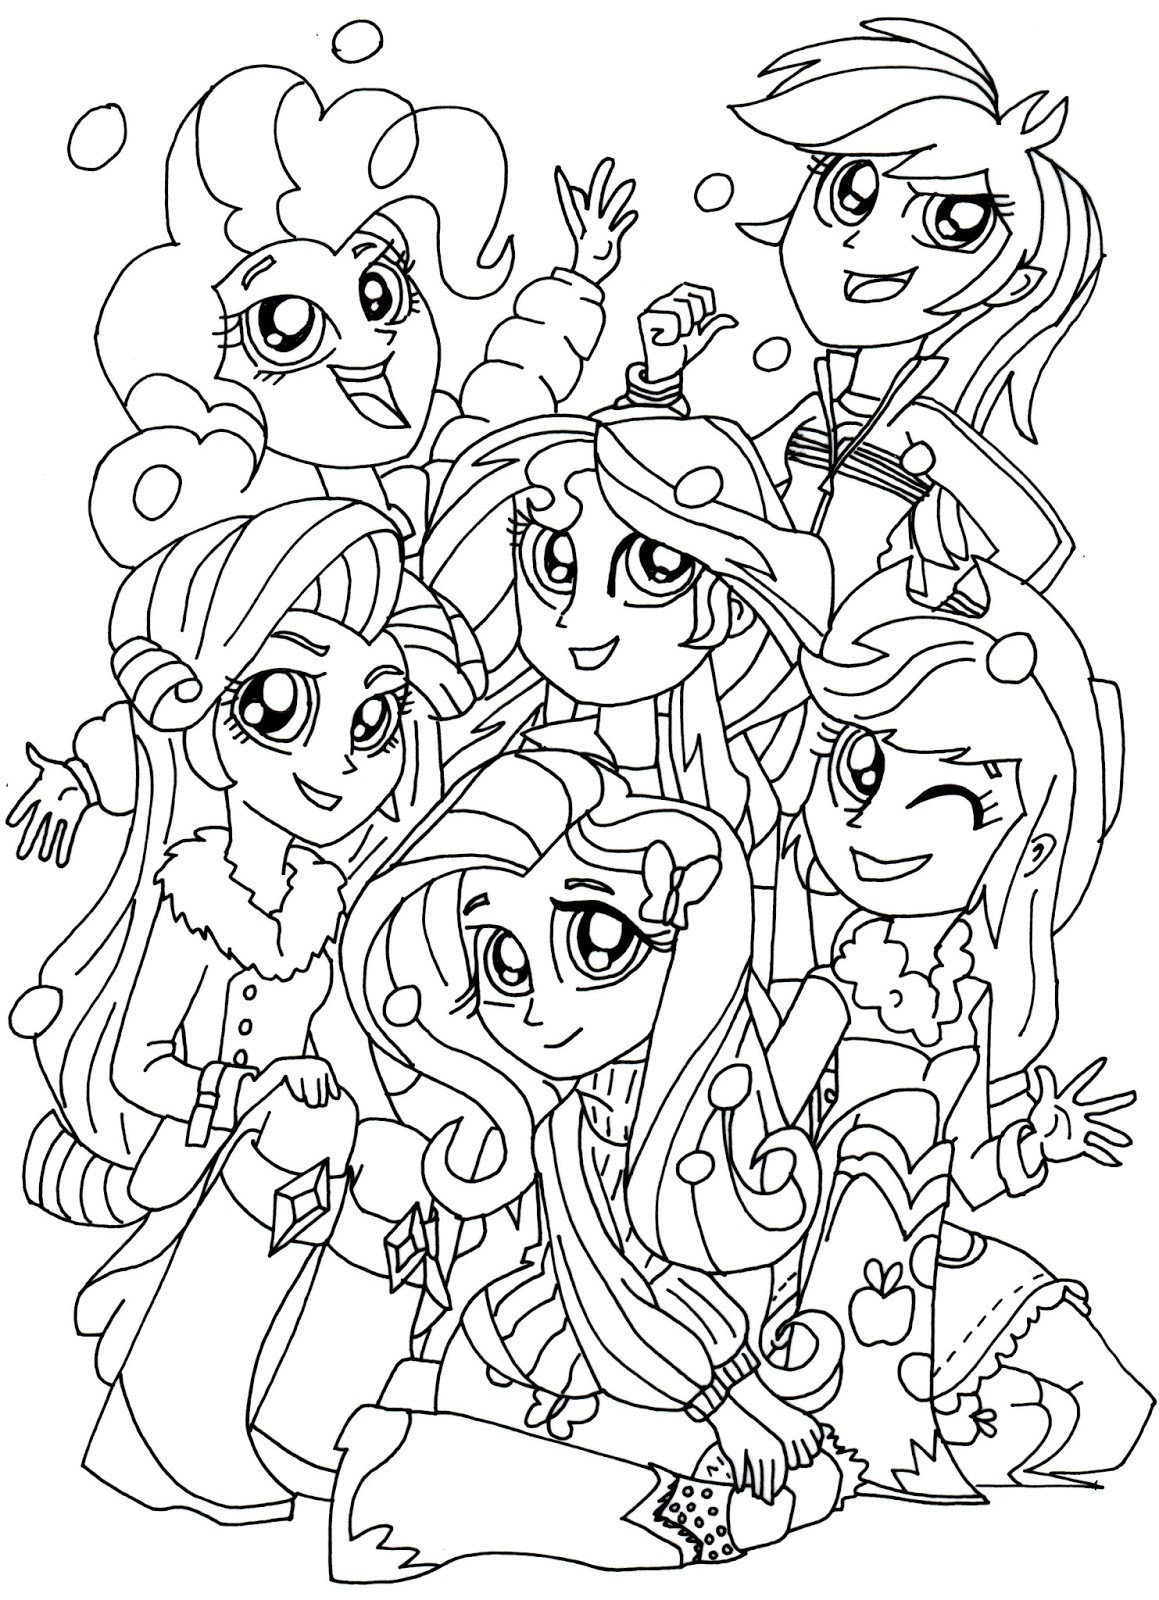 Equestria Girls Coloring Book
 My Little Pony Equestria Girls Sunset Shimmer Coloring Page